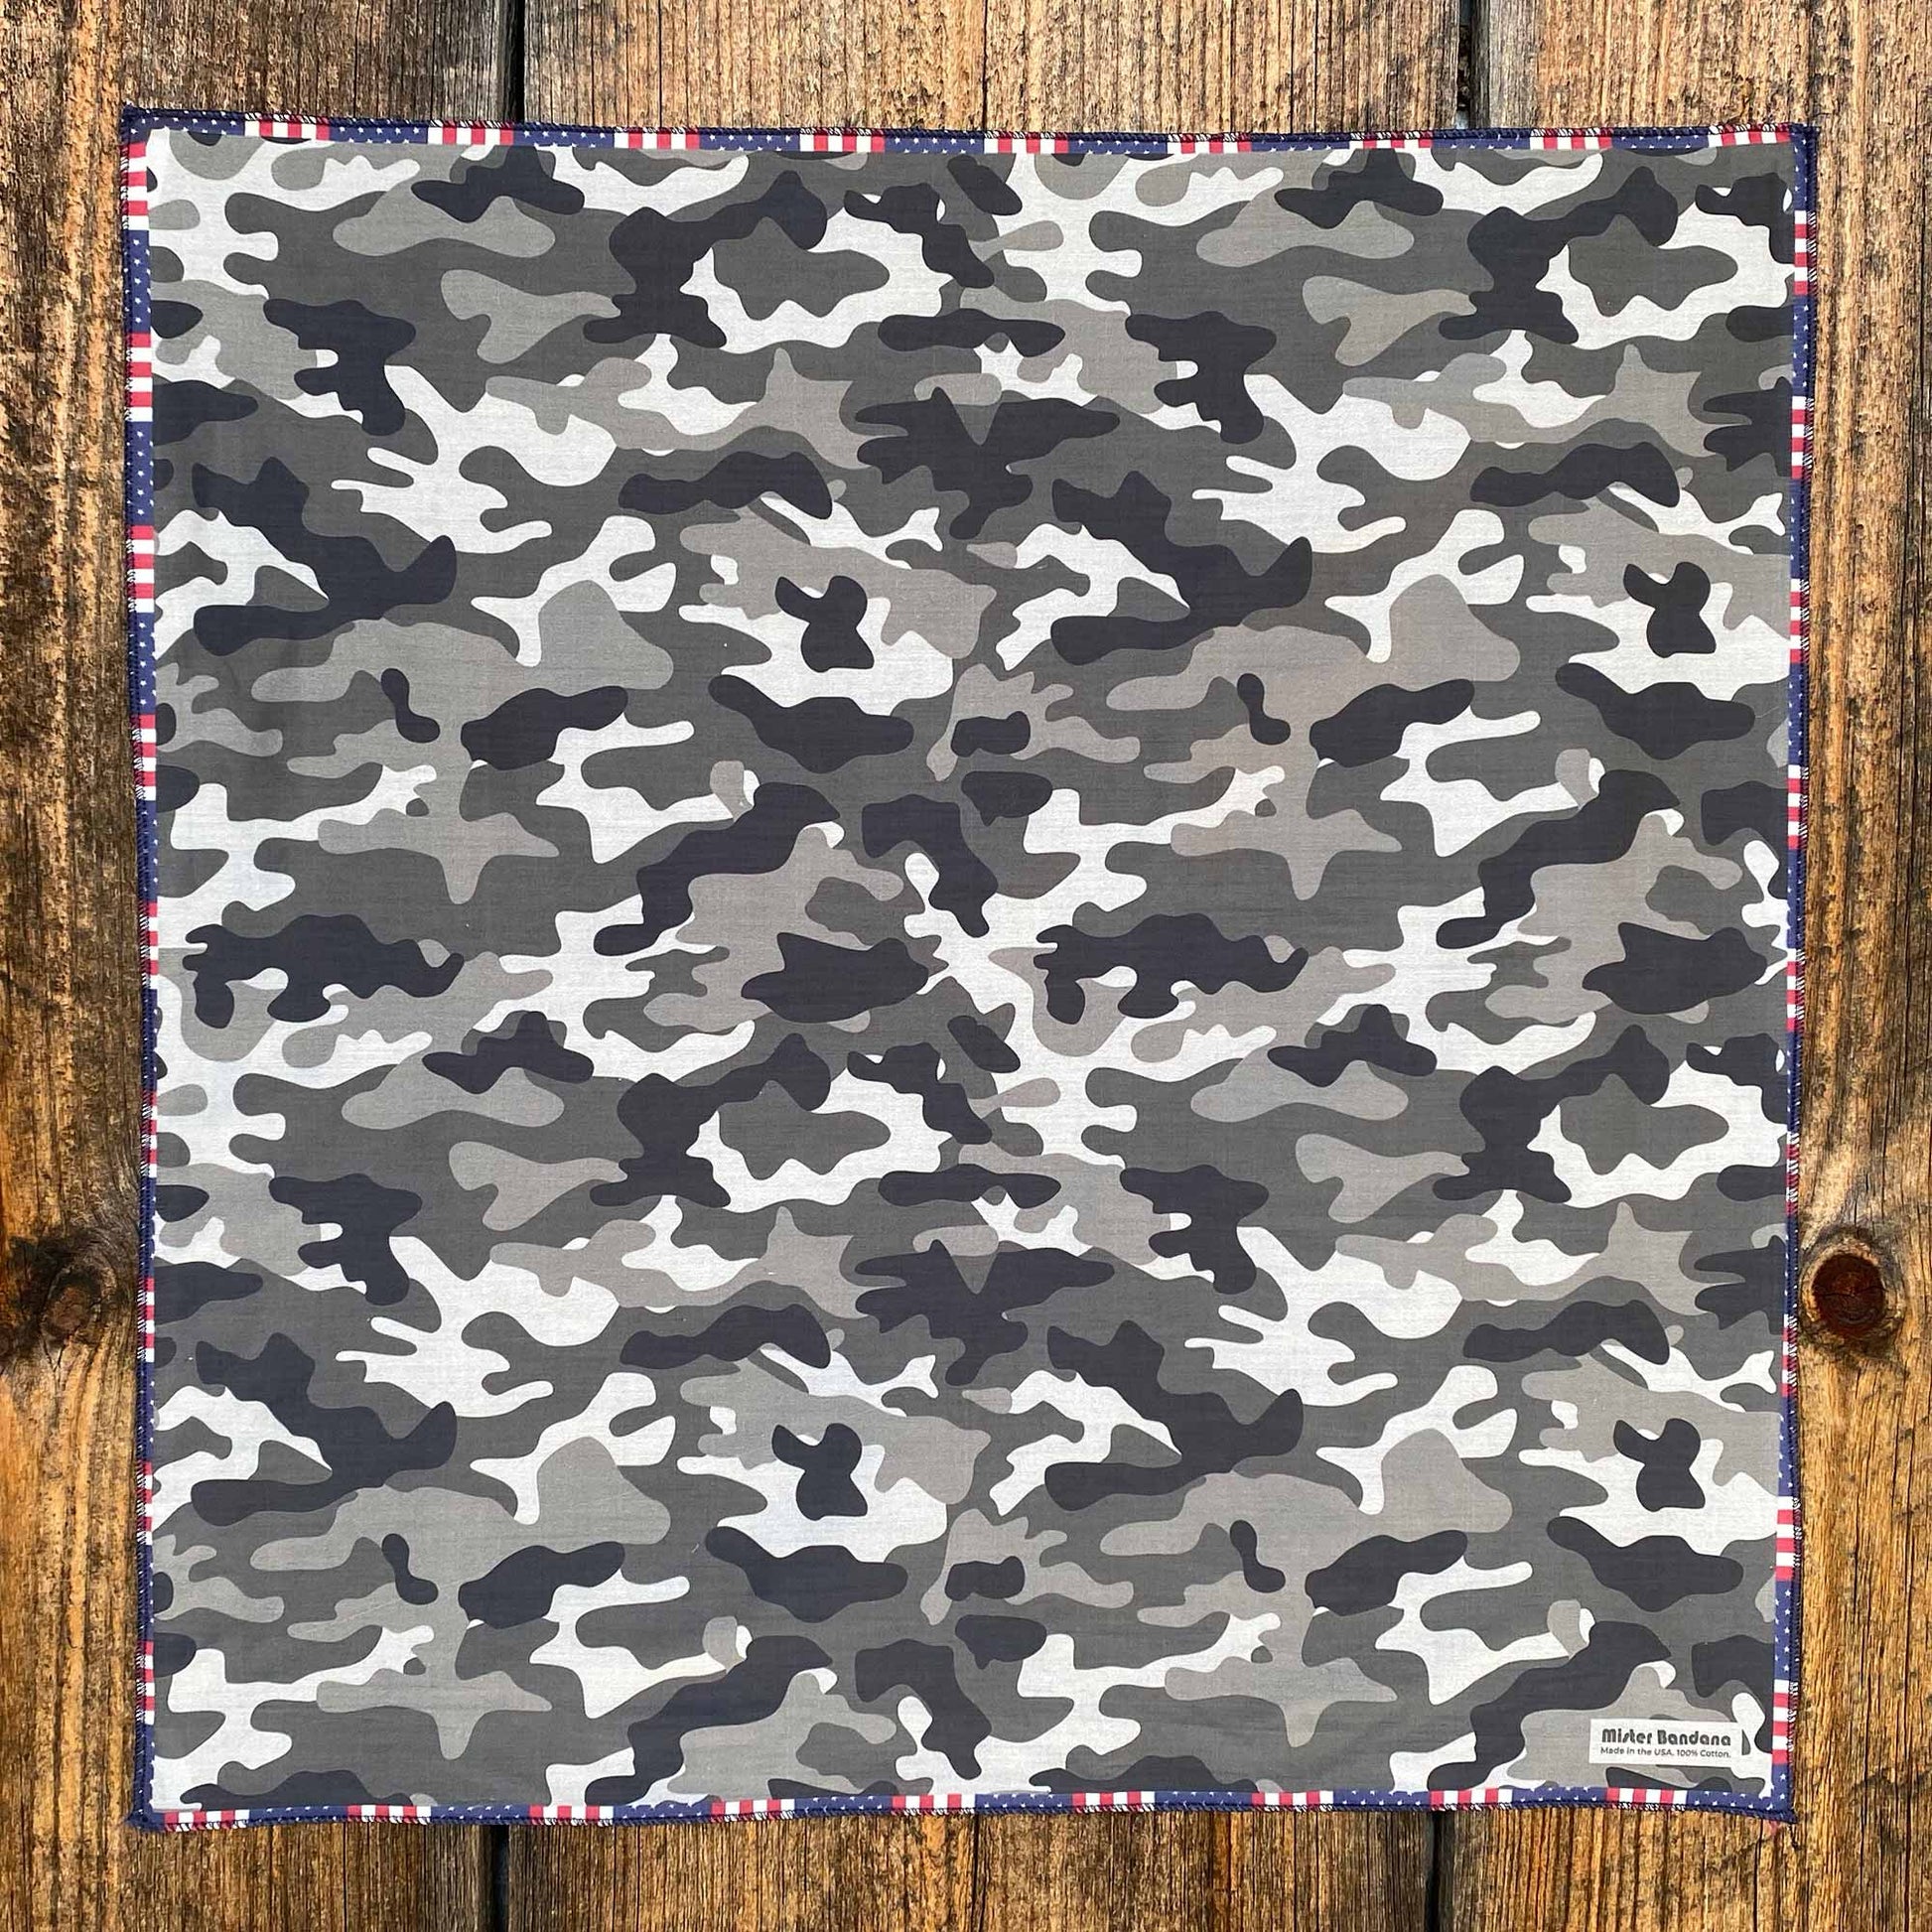 Concrete Camo grey camouflage bandana. Every day is the Fourth of July. Made in the USA 🇺🇸 